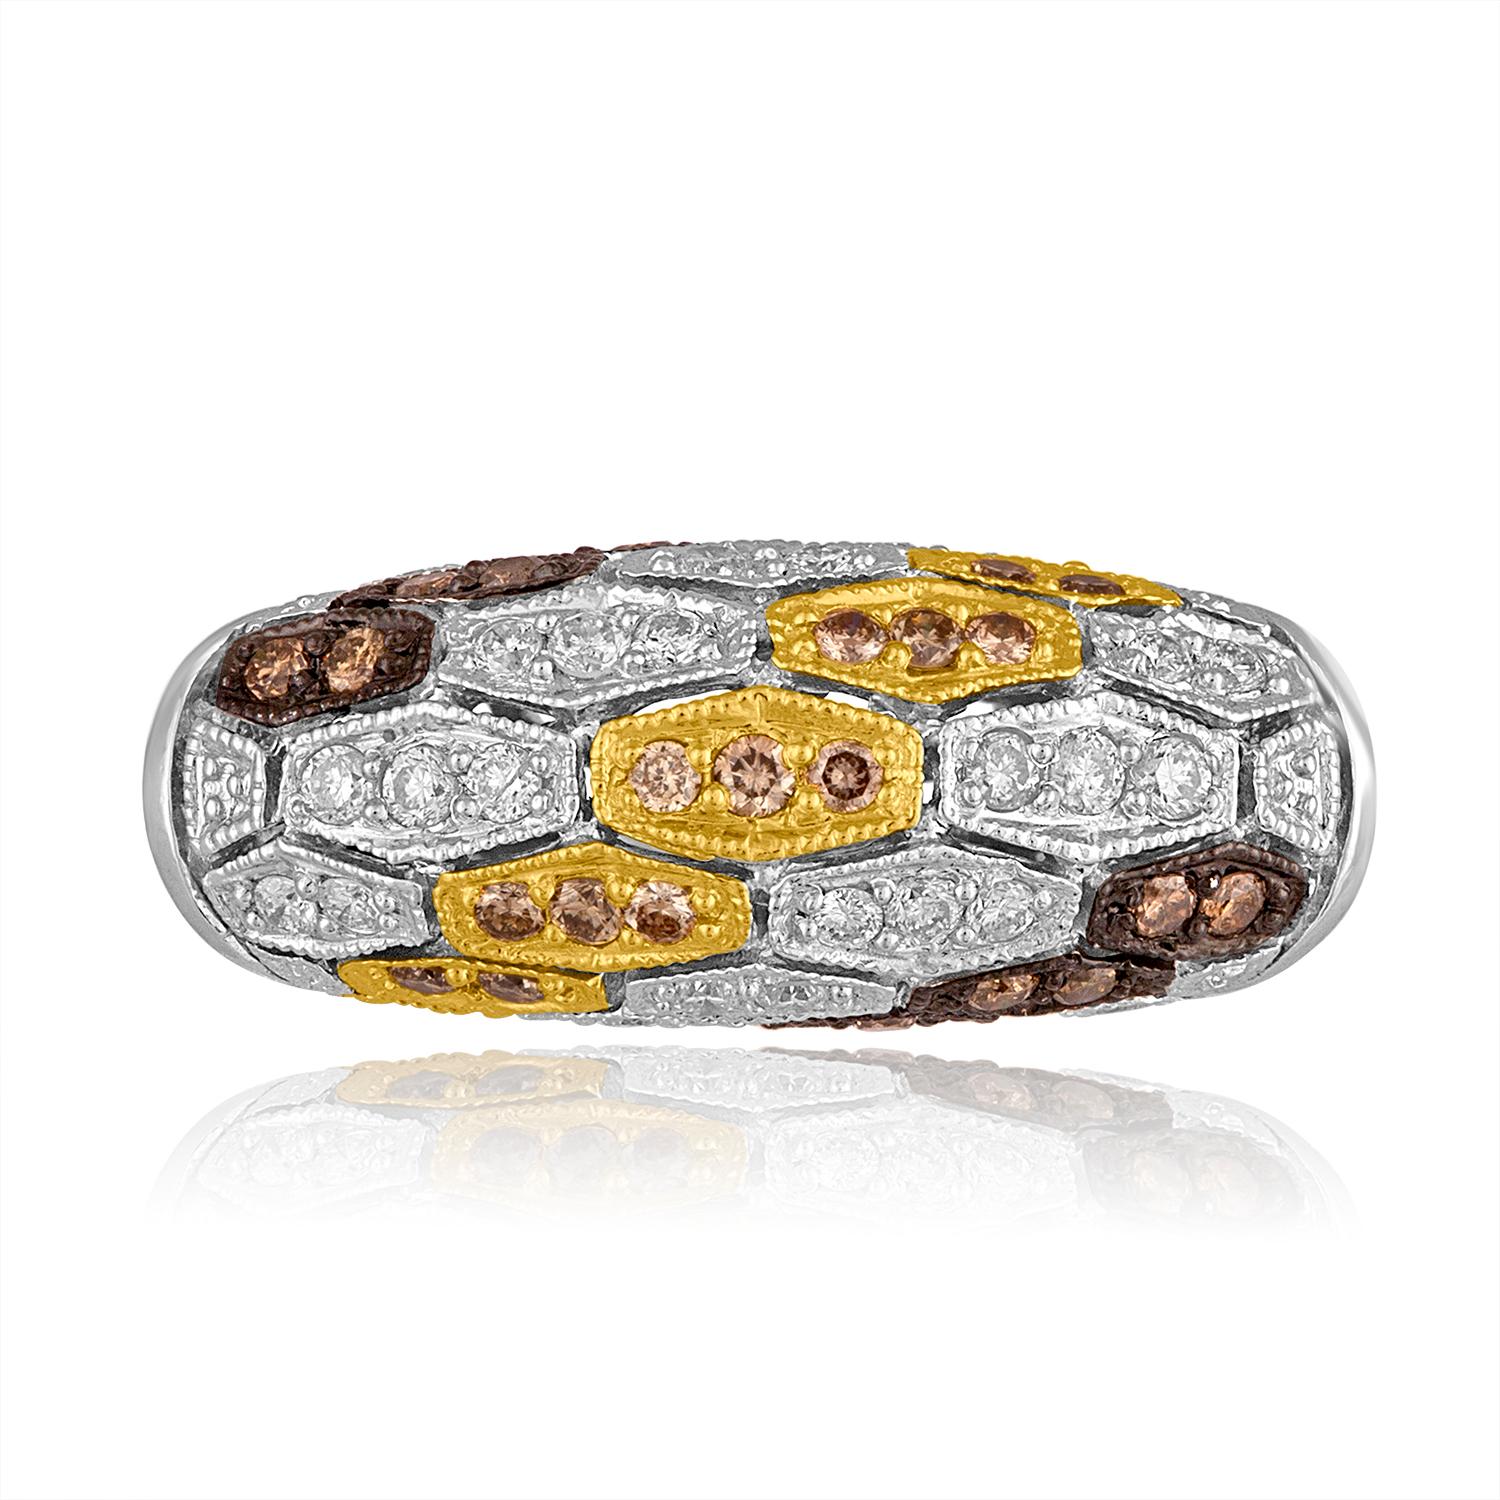 Unusual Dome Shaped Ring
The ring is 14K White Gold
There are 0.66 Carats in White Diamonds G SI
There are 0.30 Carats in Champagne & Brown Diamonds
The center has Yellow Gold Plating
The sides have Black Rhodium Plating
The ring looks like it has